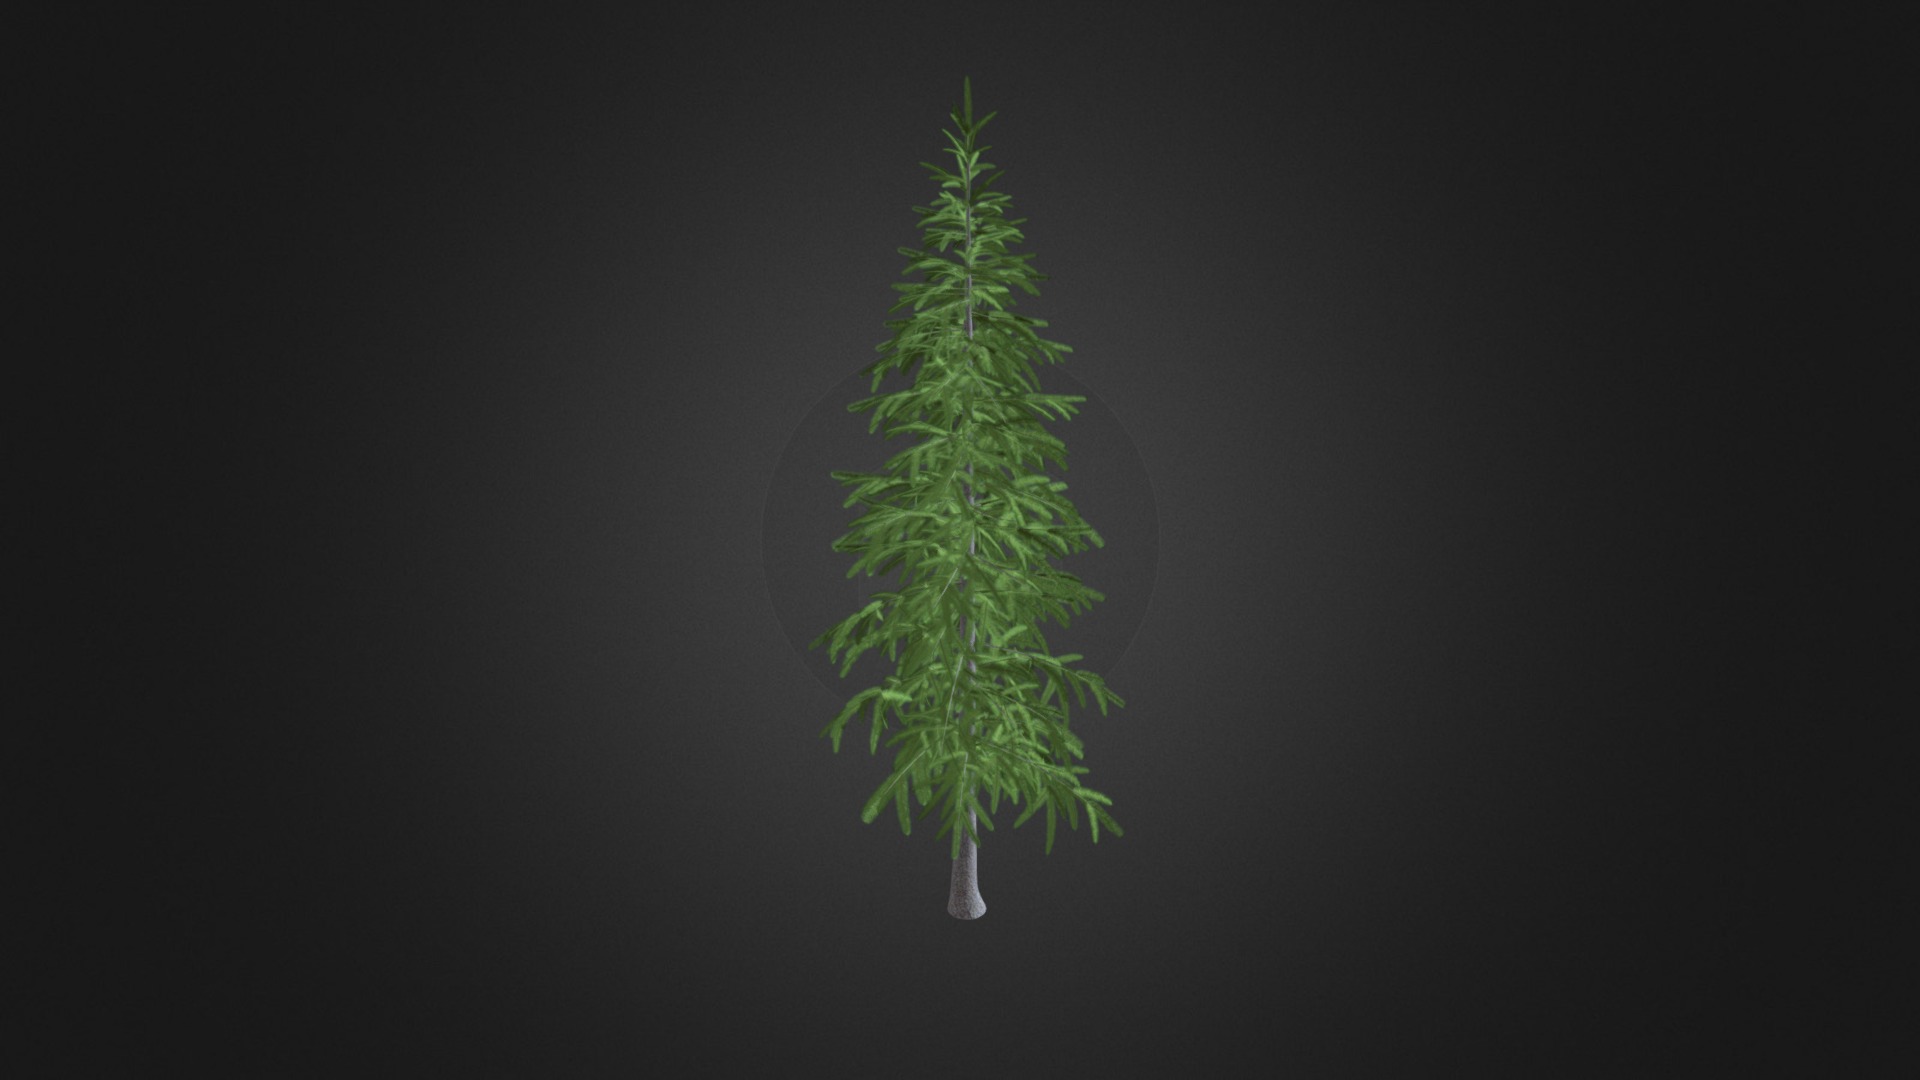 3D model Fir Tree 3D Model 3.4m - This is a 3D model of the Fir Tree 3D Model 3.4m. The 3D model is about a tree with green leaves.